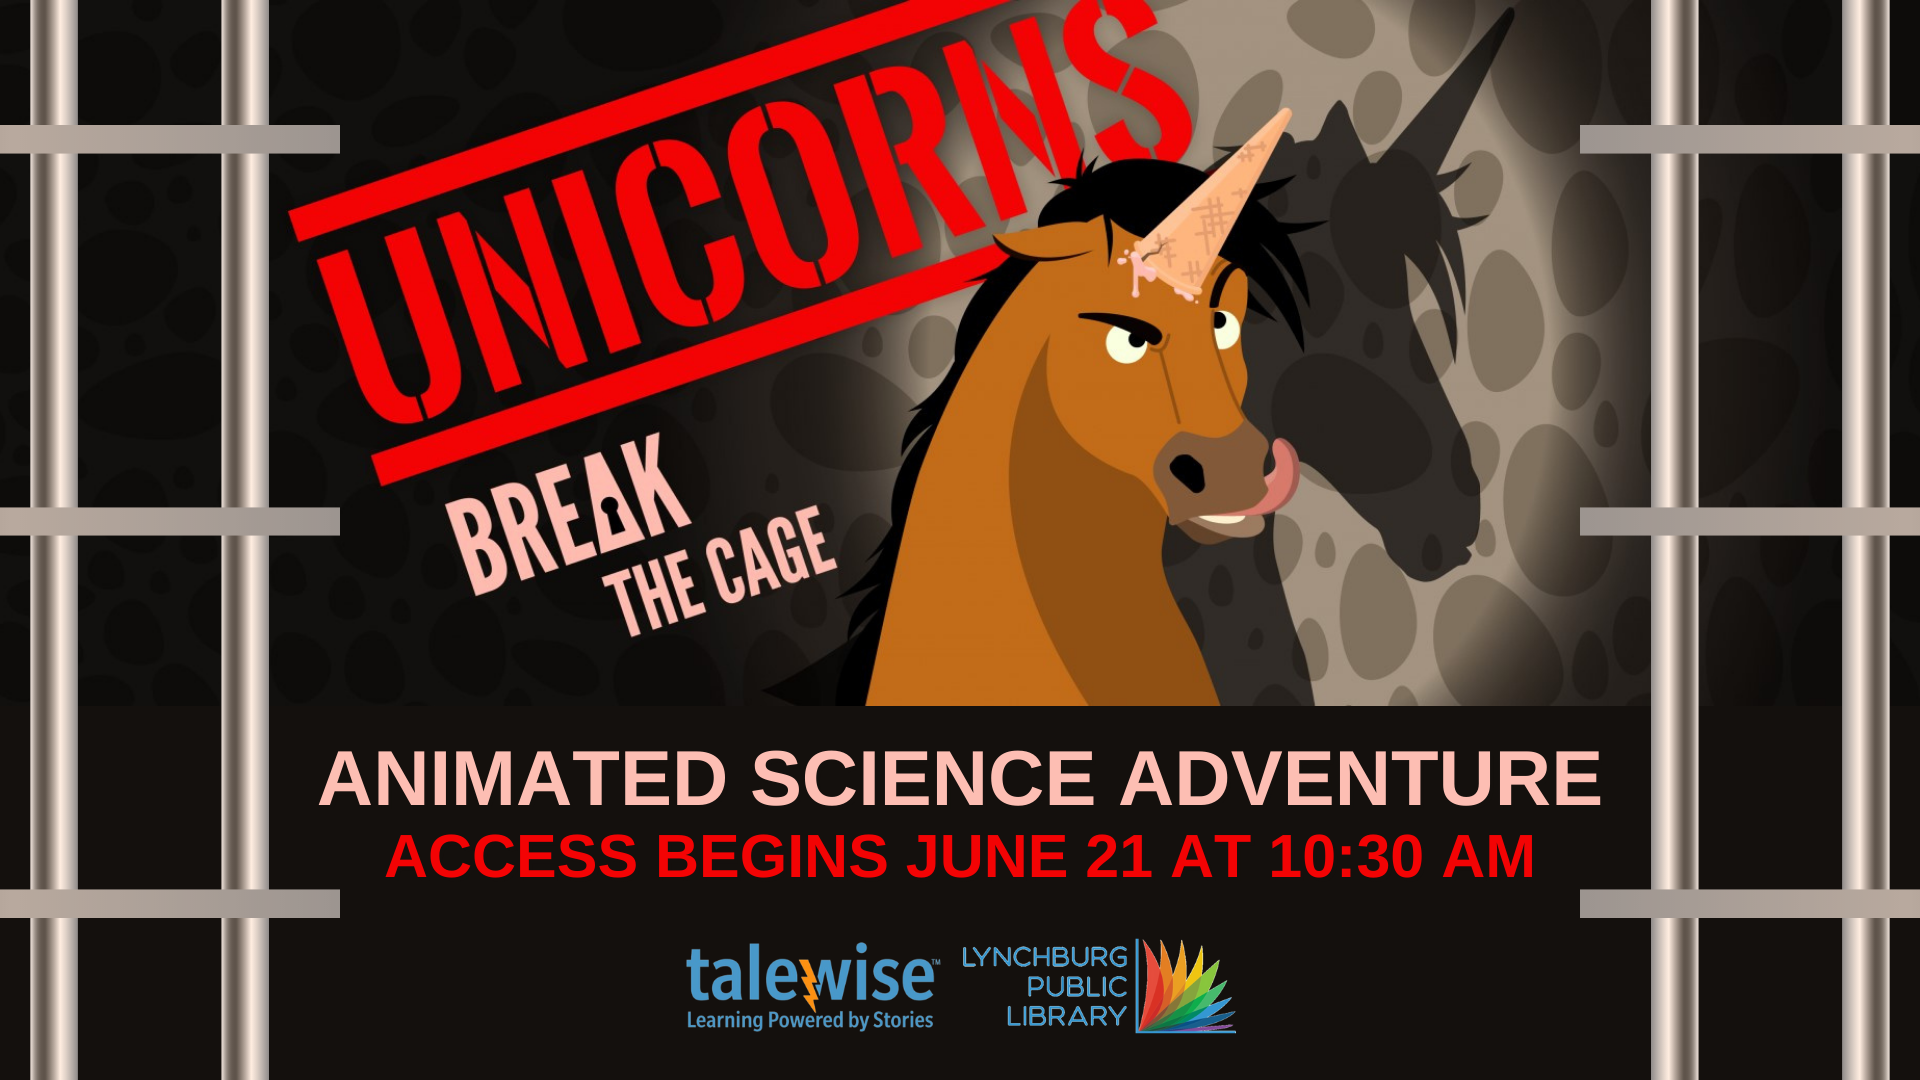 Image features a fake cartoon unicorn and the words "Unicorns: Break the Cage" along with the event information listed on this page.